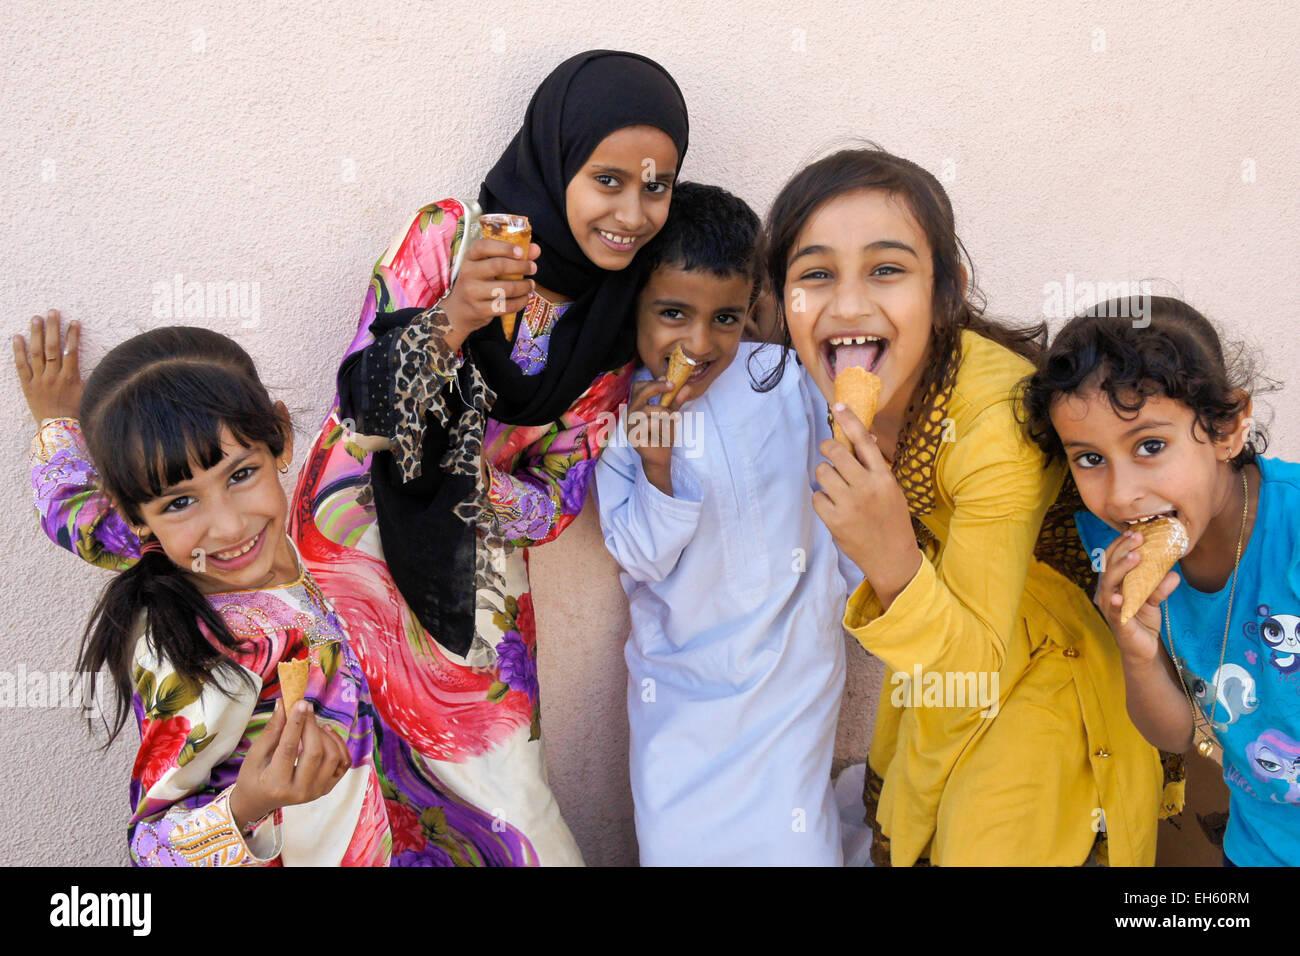 Children eating ice cream cones and being silly, Nizwa, Oman Stock Photo